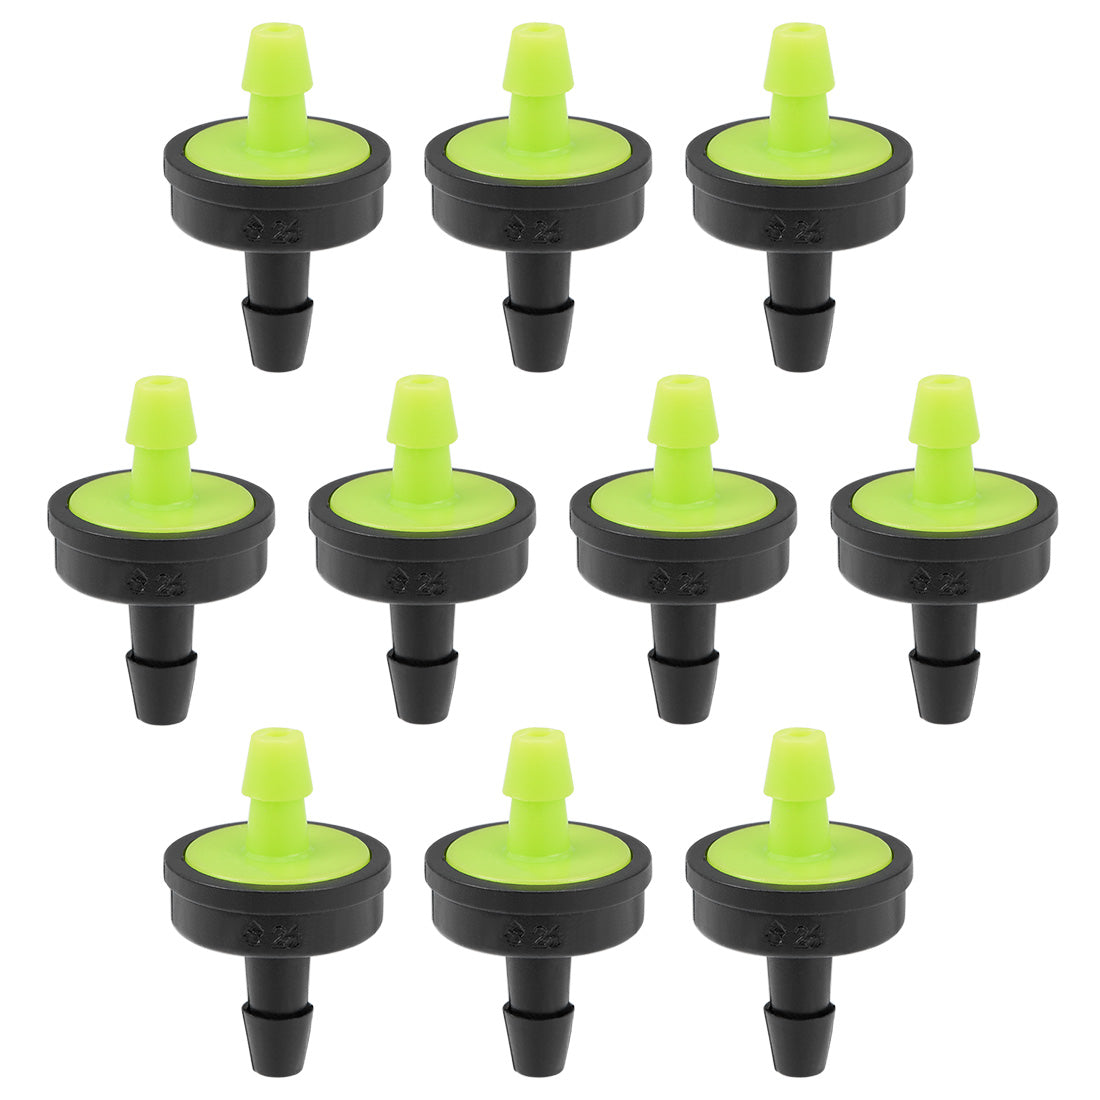 uxcell Uxcell Pressure Regulator Dripper 8GPH 30L/H Emitter for Garden Lawn Drip Irrigation with Barbed Hose Connector Plastic Green 50pcs